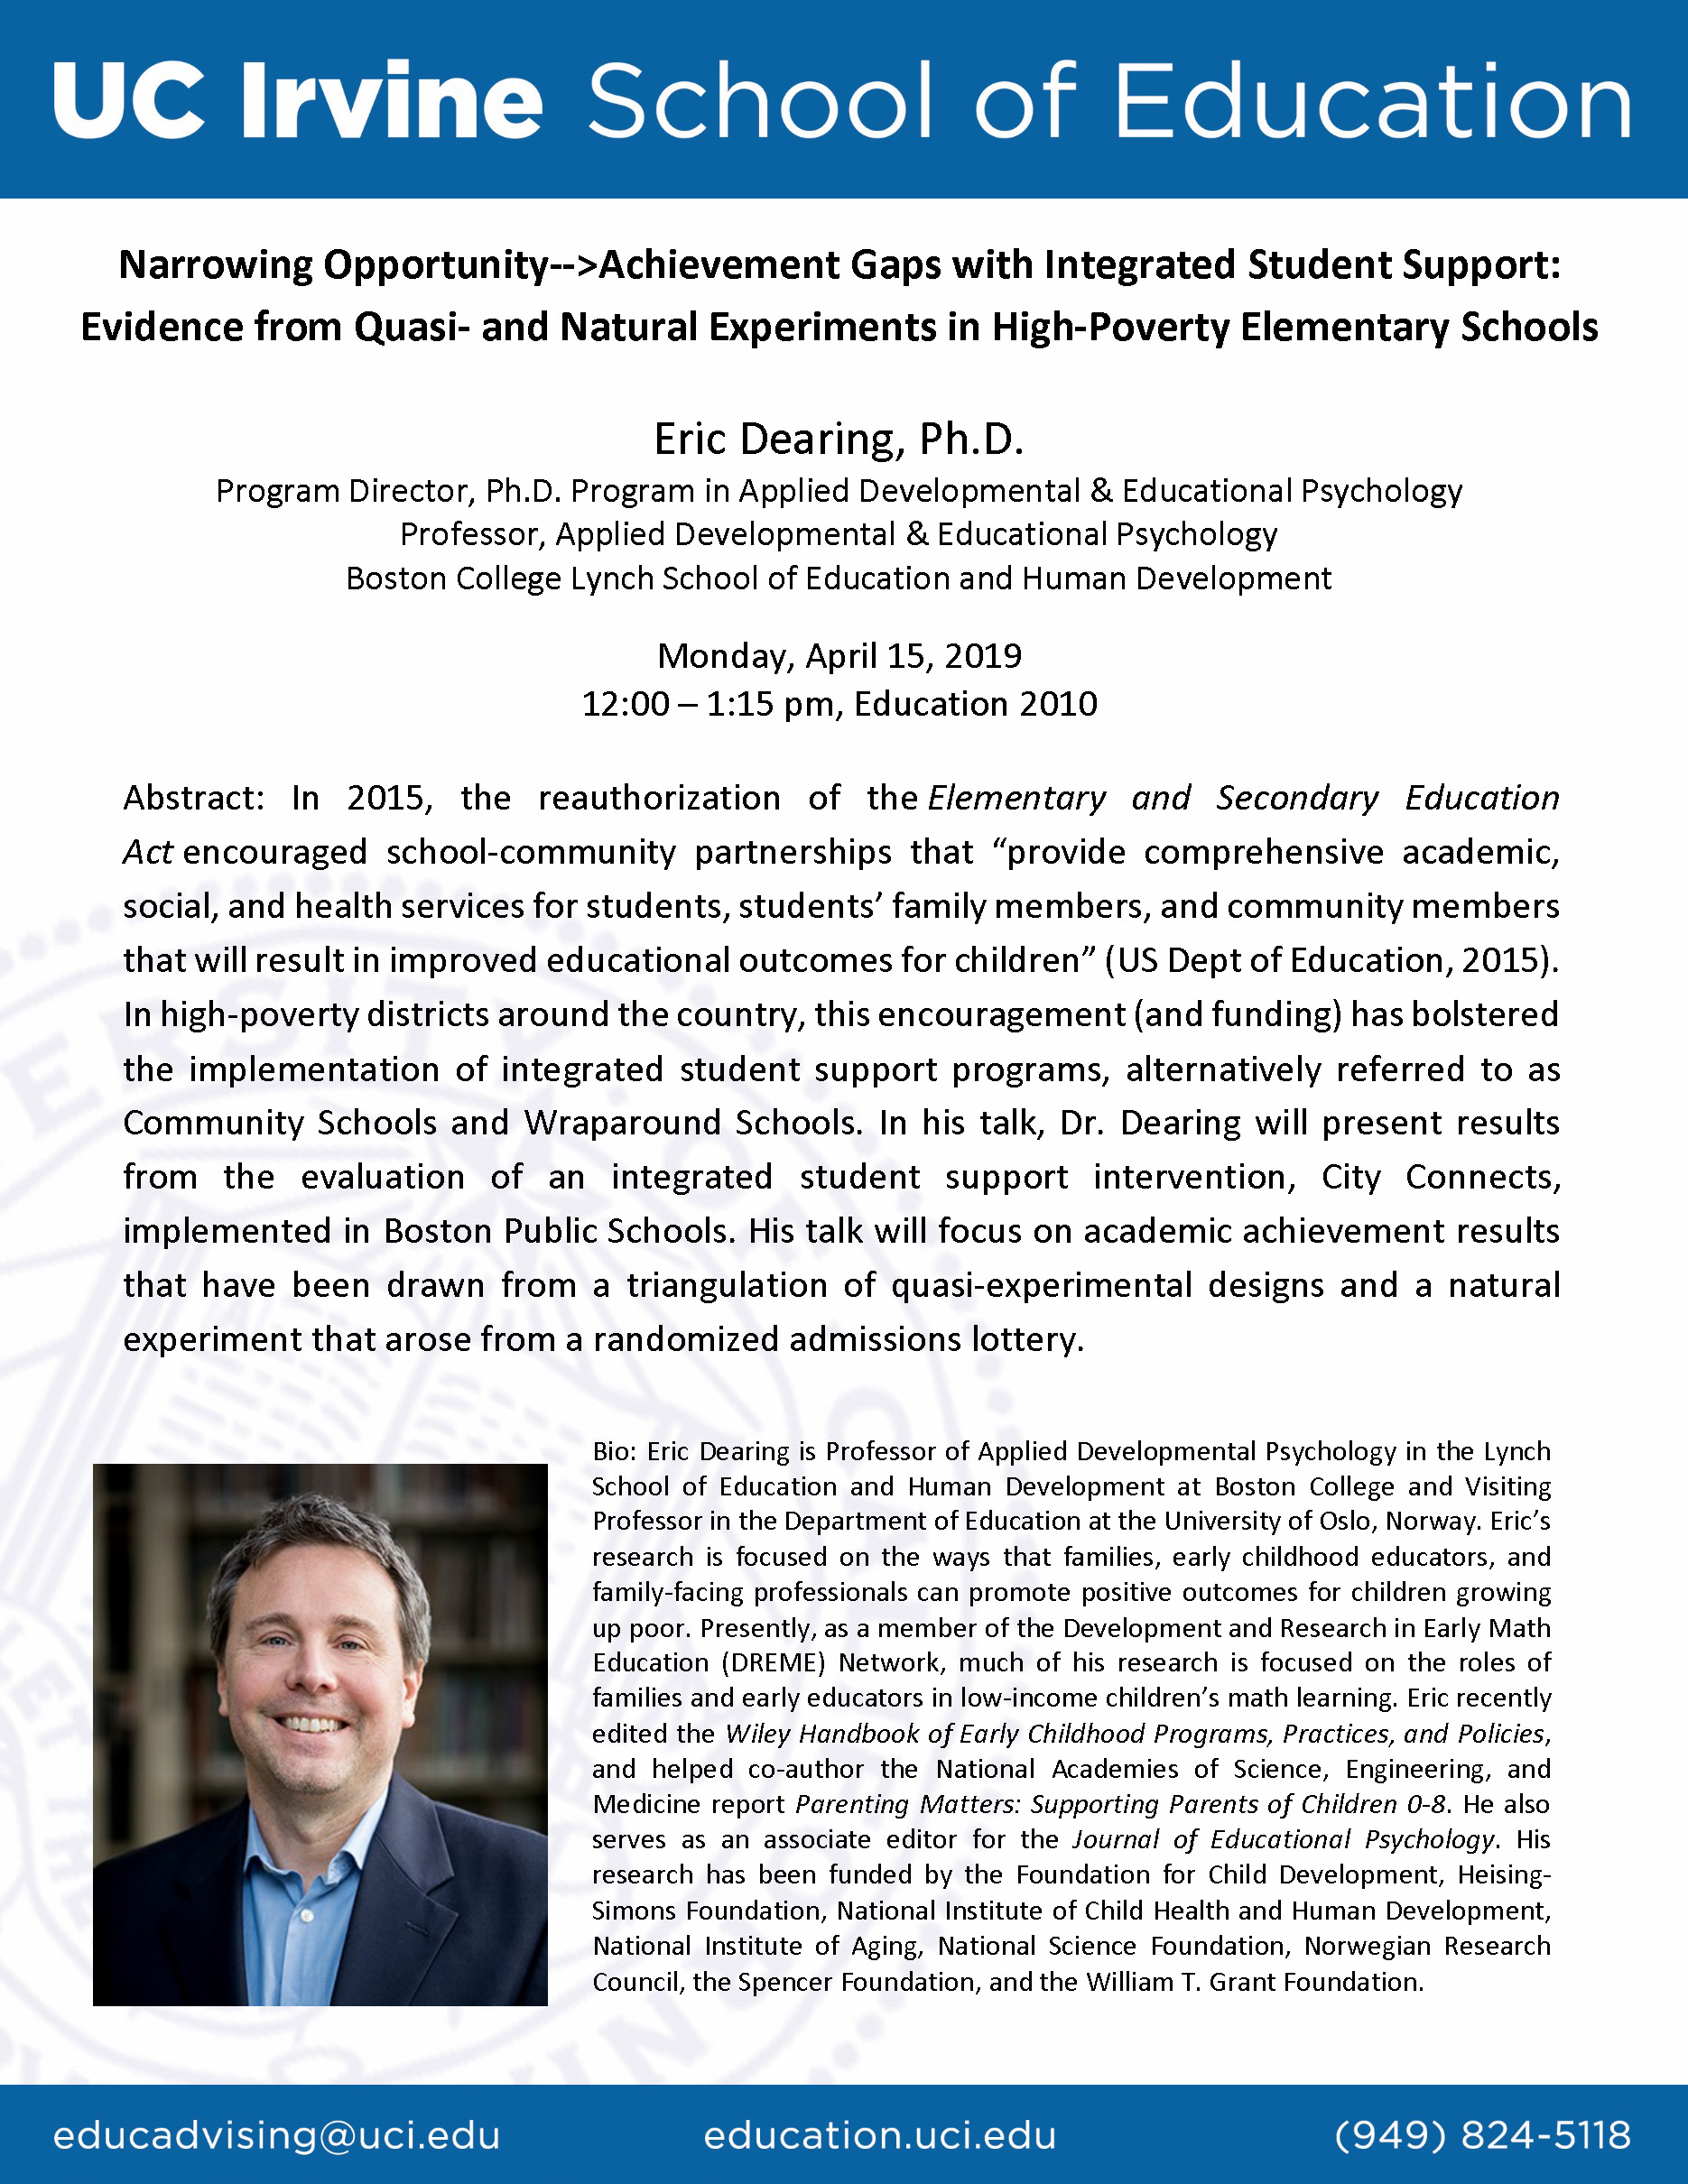 Narrowing Opportunity-->Achievement Gaps with Integrated Student Support: Evidence from Quasi- and Natural Experiments in High-Poverty Elementary Schools